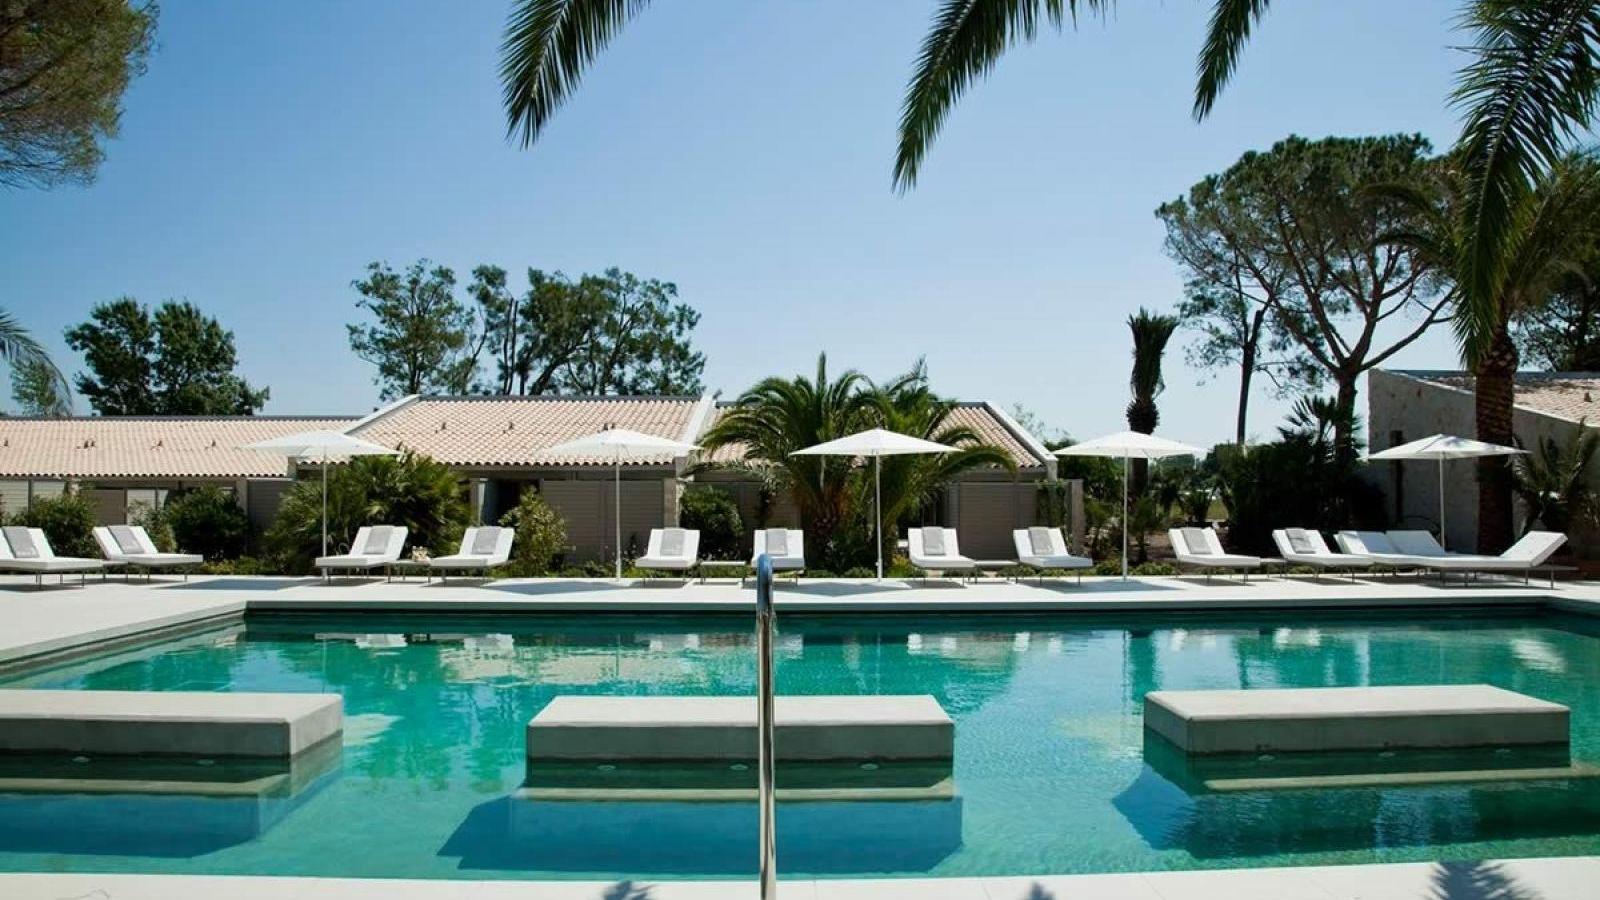 Win a luxury stay with the Sezz- Saint-Tropez Facebook contest